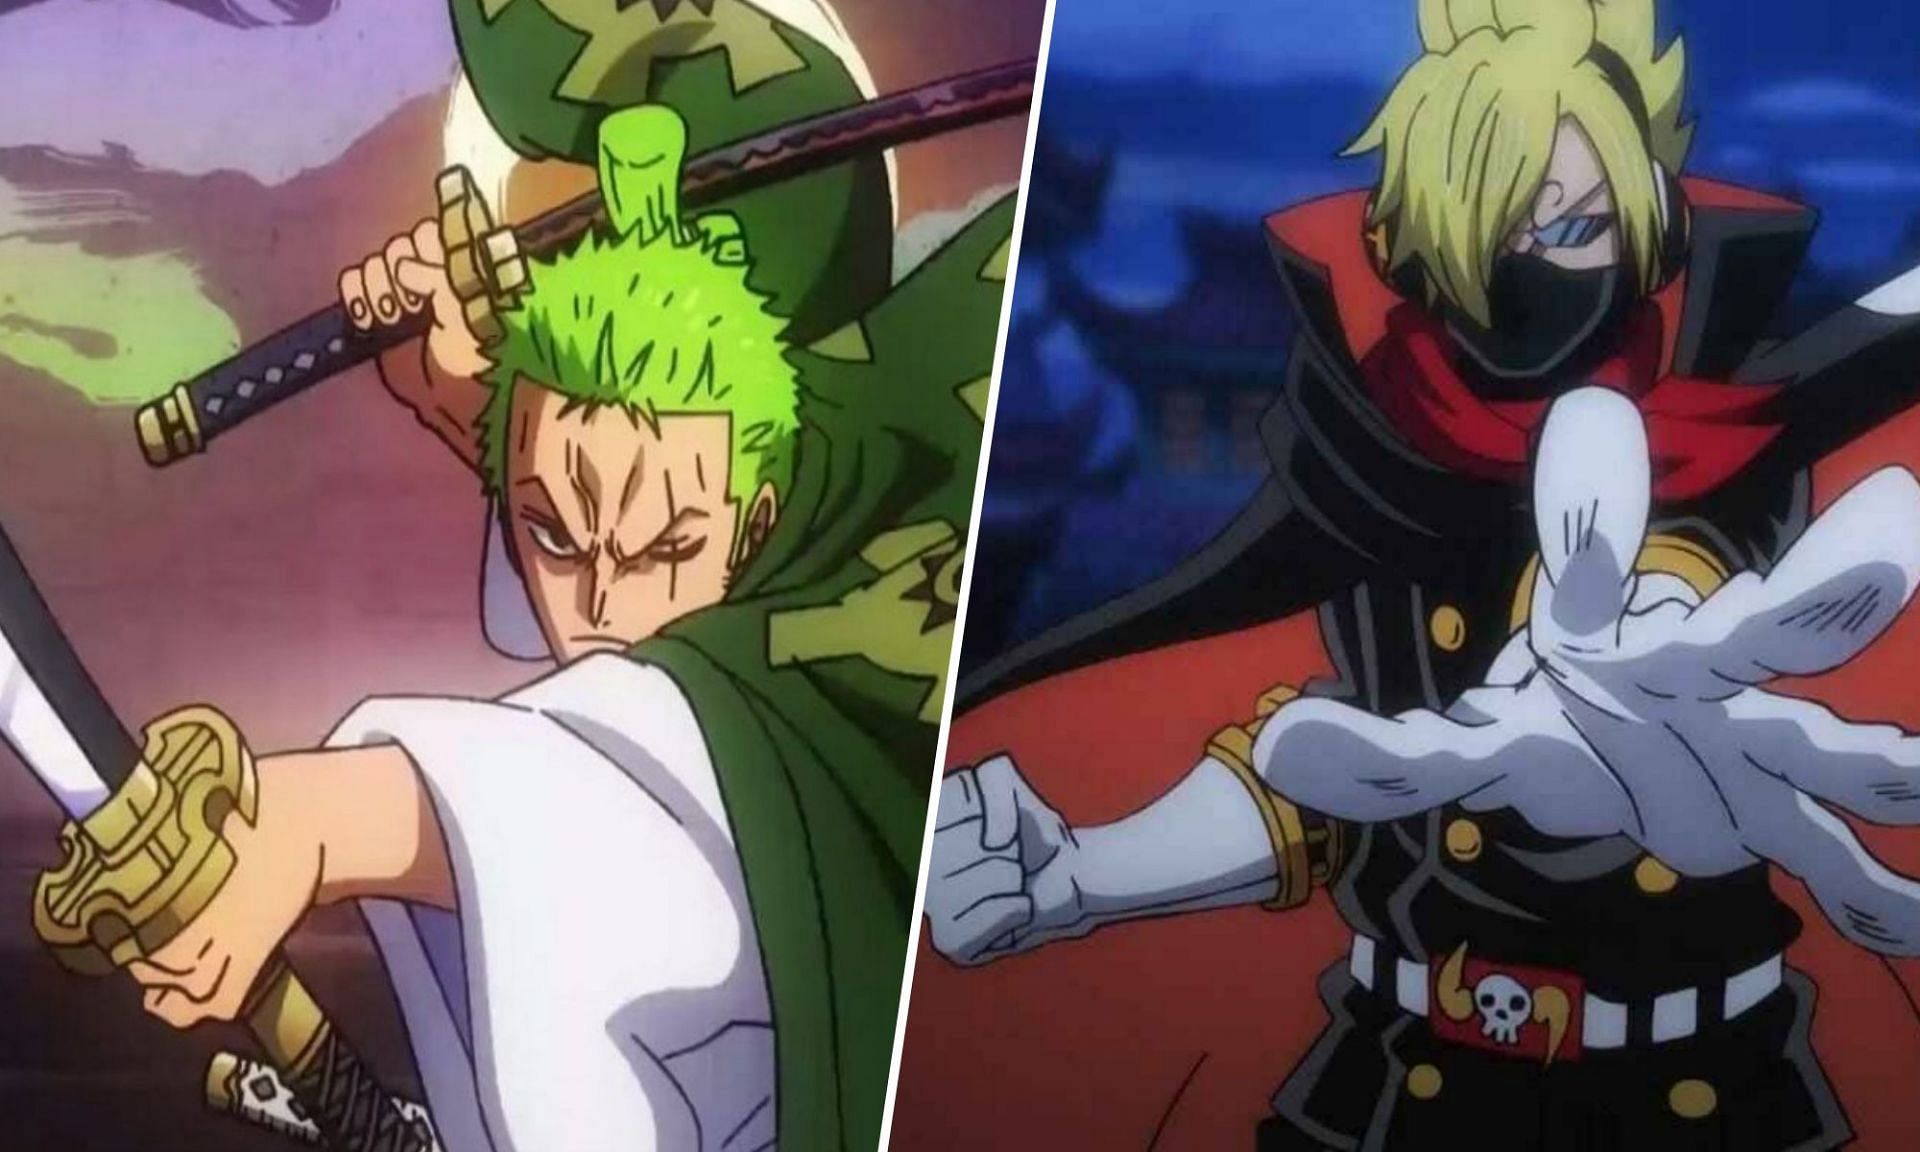 zoro and sanji attack king and queen